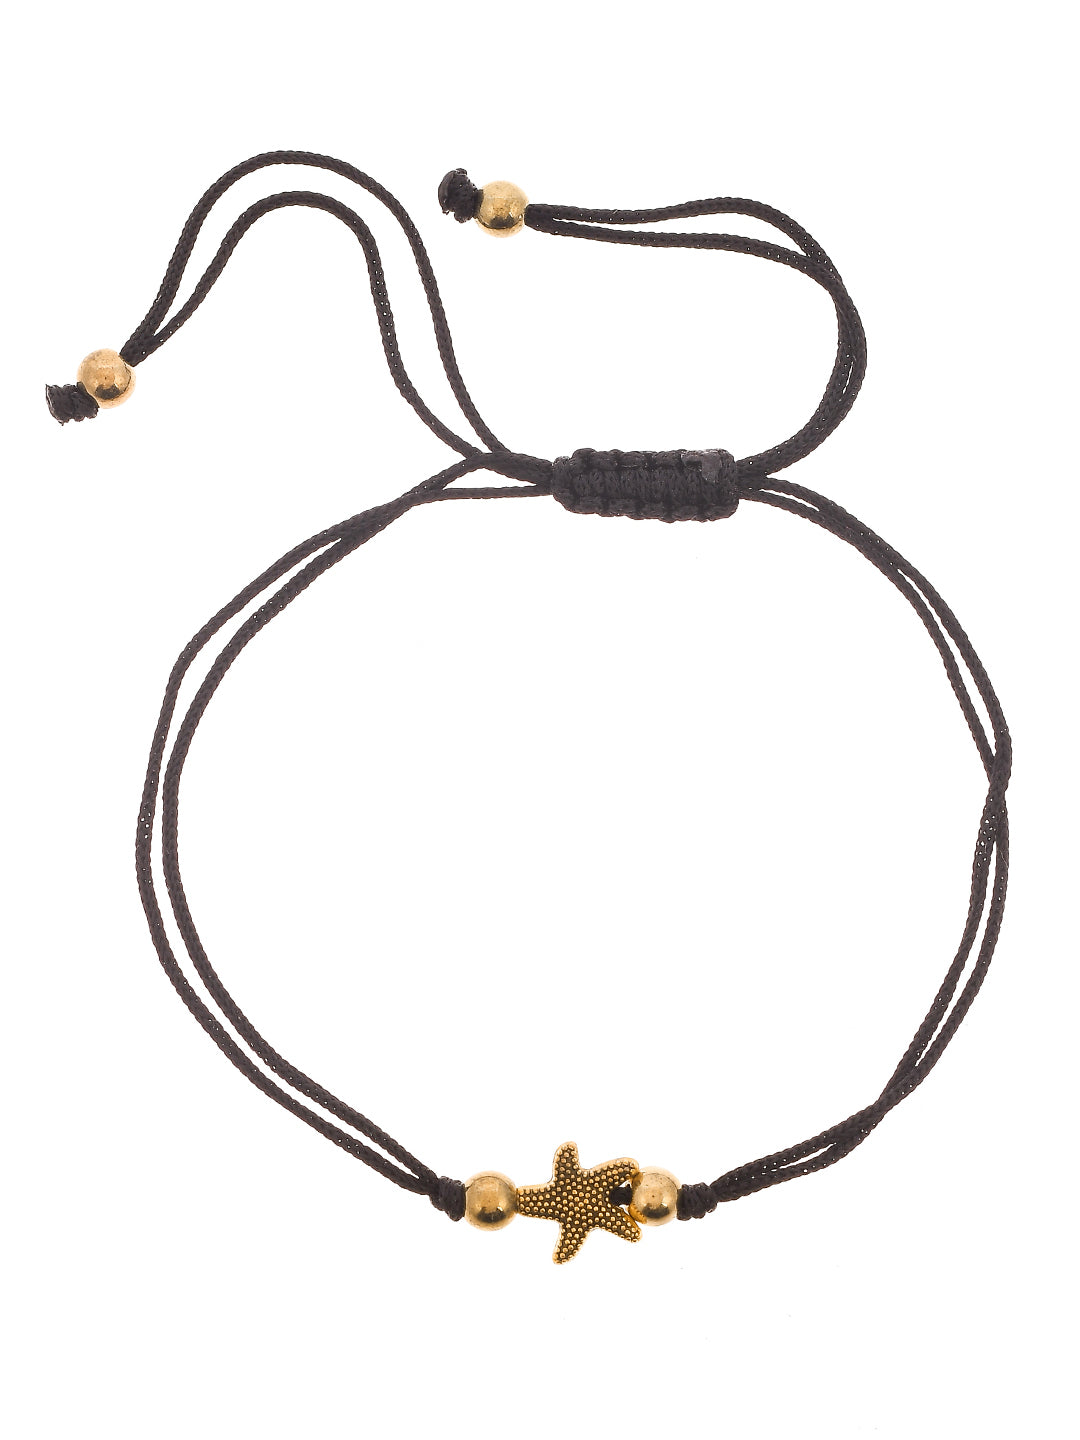 Oxidized Gold Star Fish Charm Bead Anklet